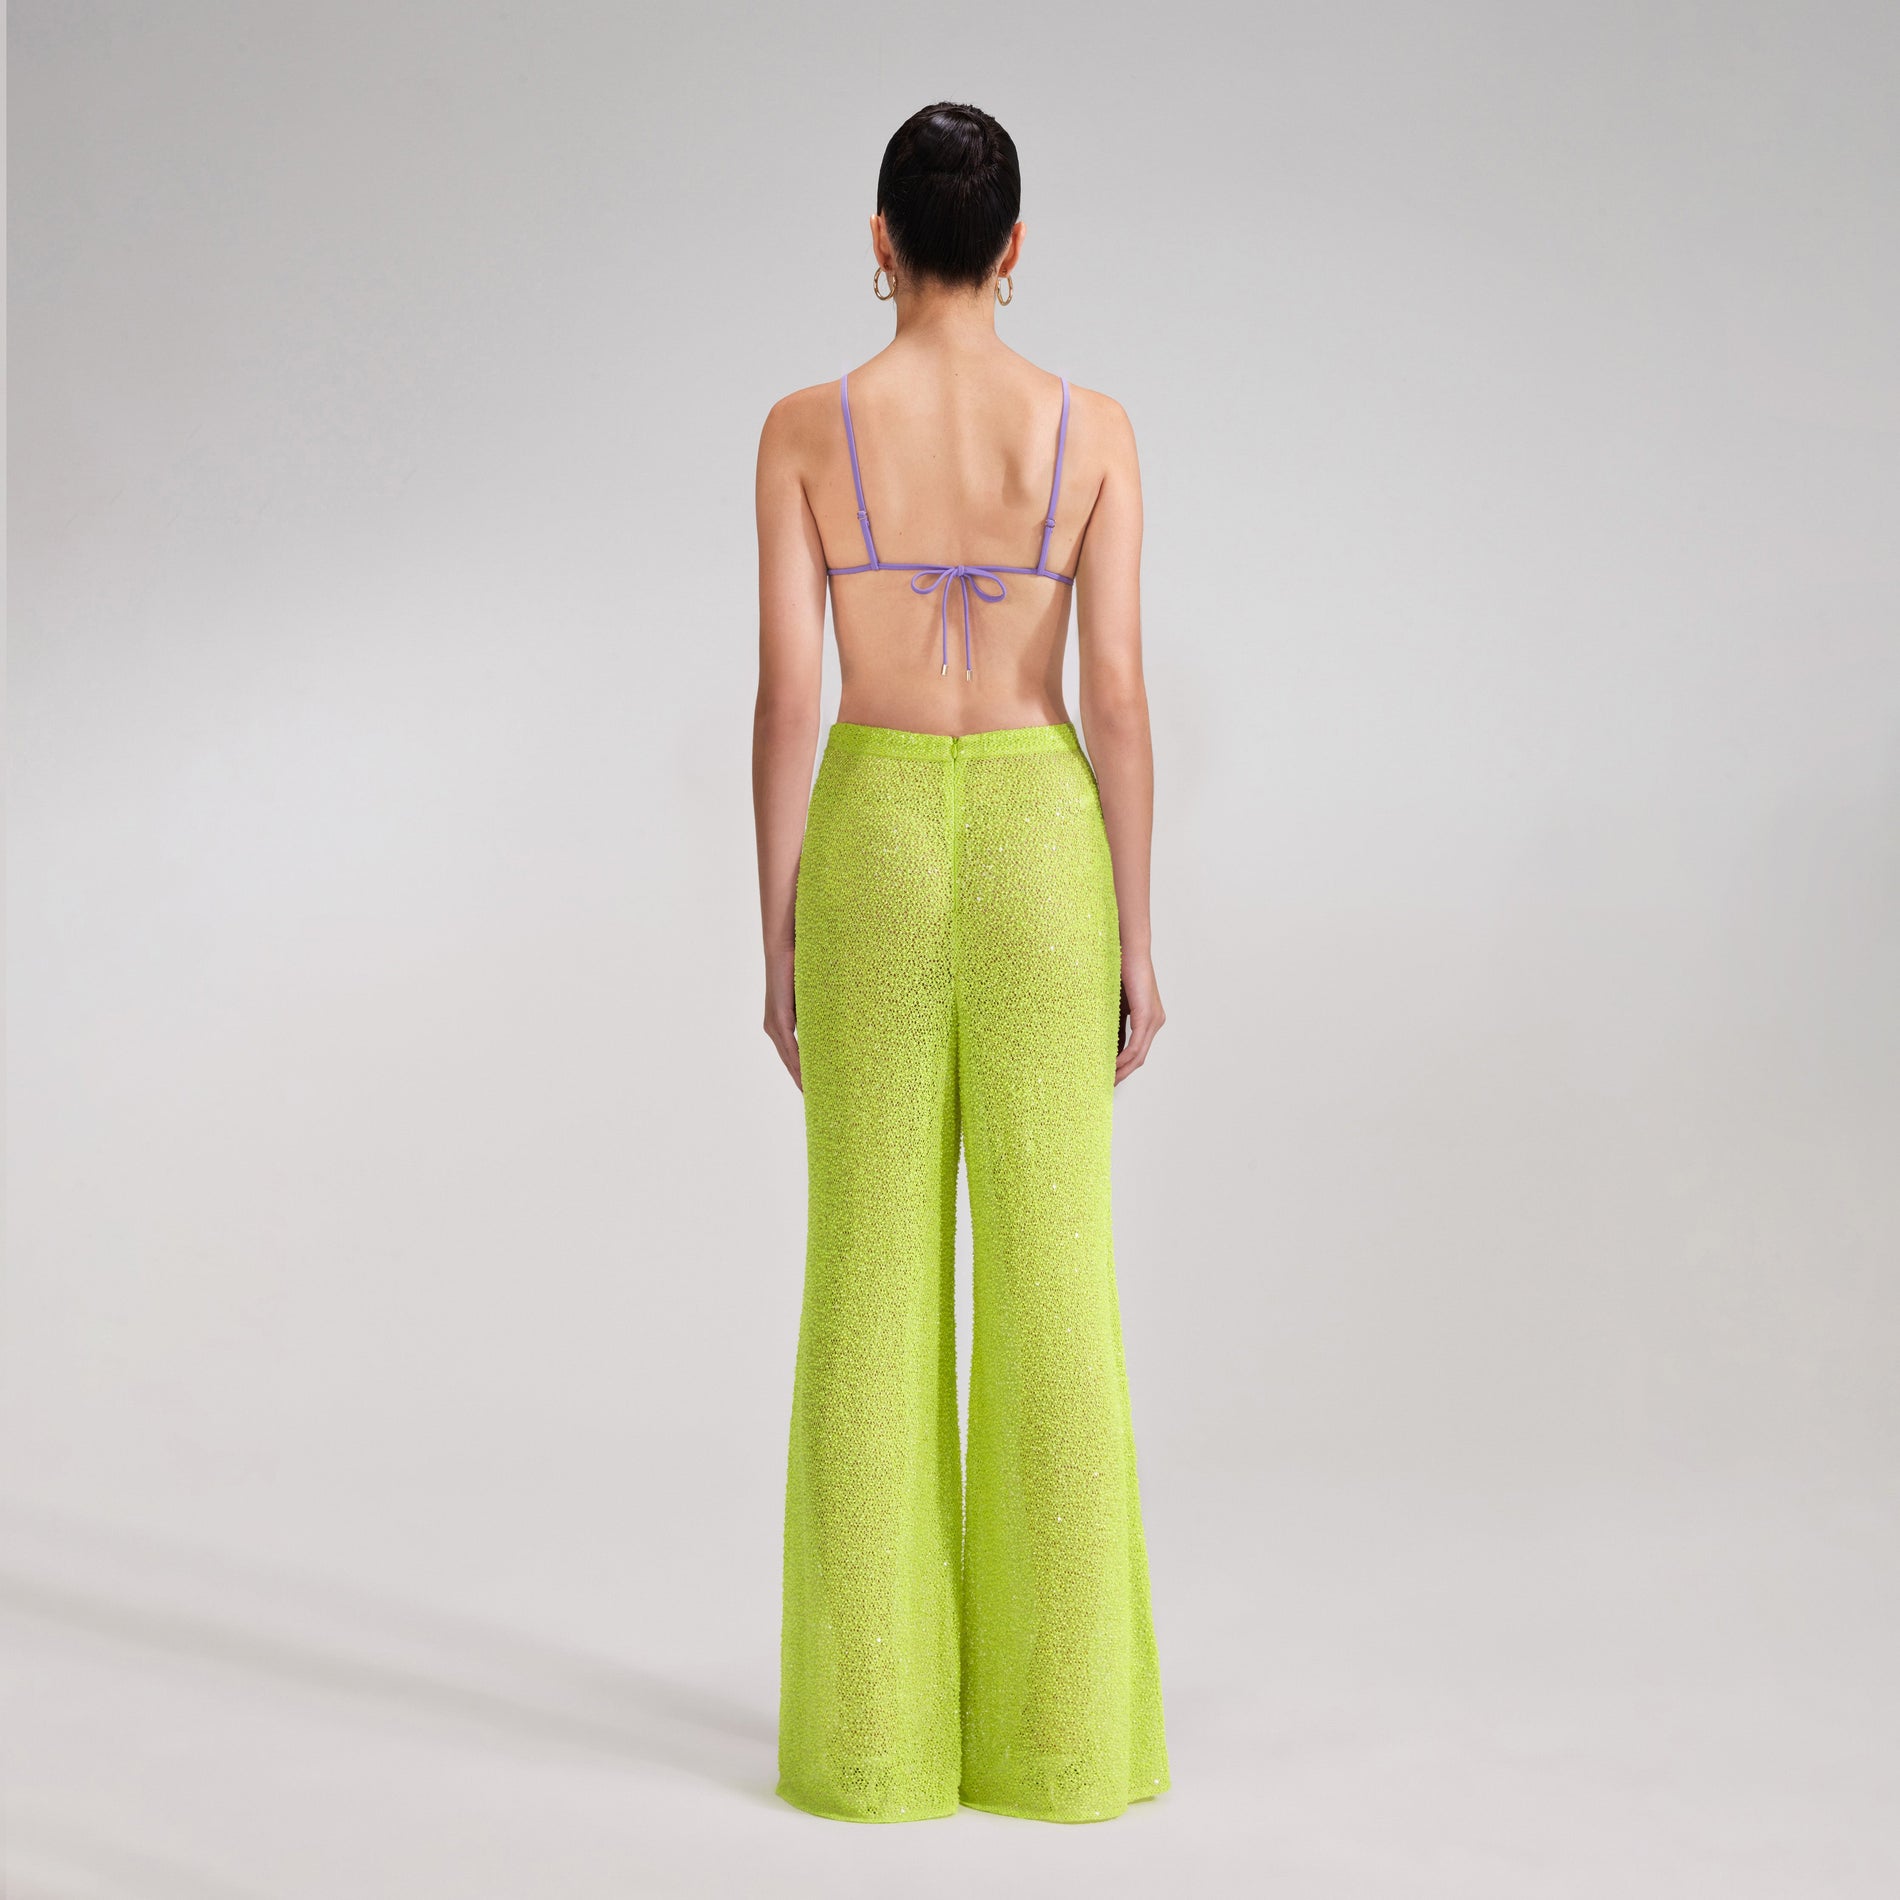 A woman wearing the Green Beaded Trousers